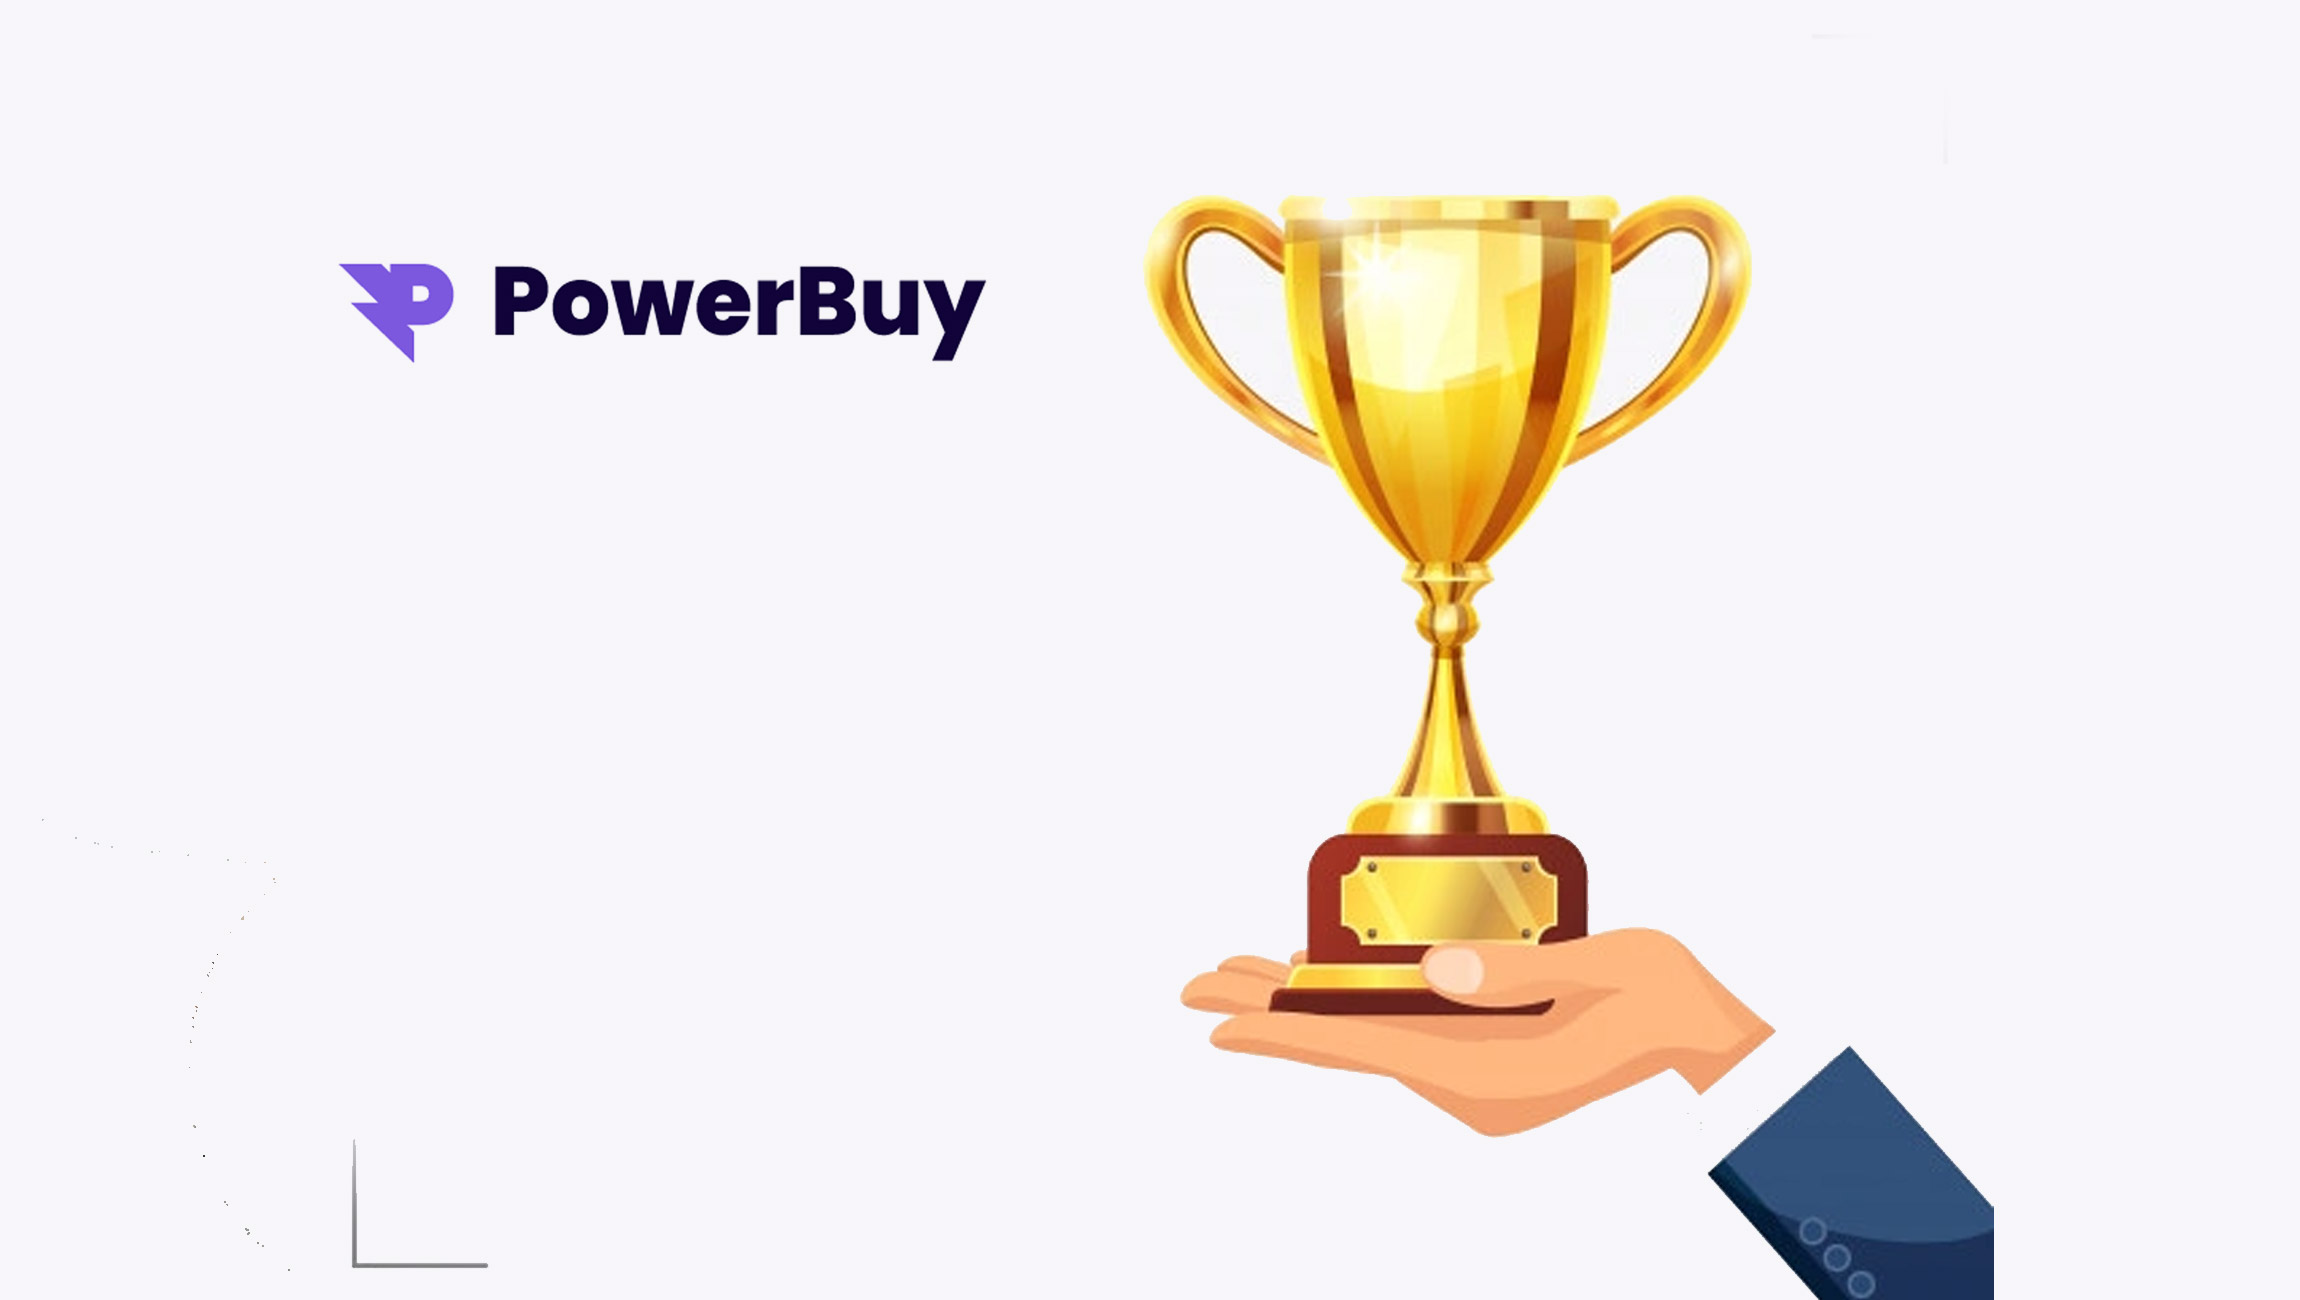 PowerBuy Awarded US Patent 10,929,873 for Their Group Buying and Social Ecommerce Gamification Concept, Acquires Two New Advisory Board Members